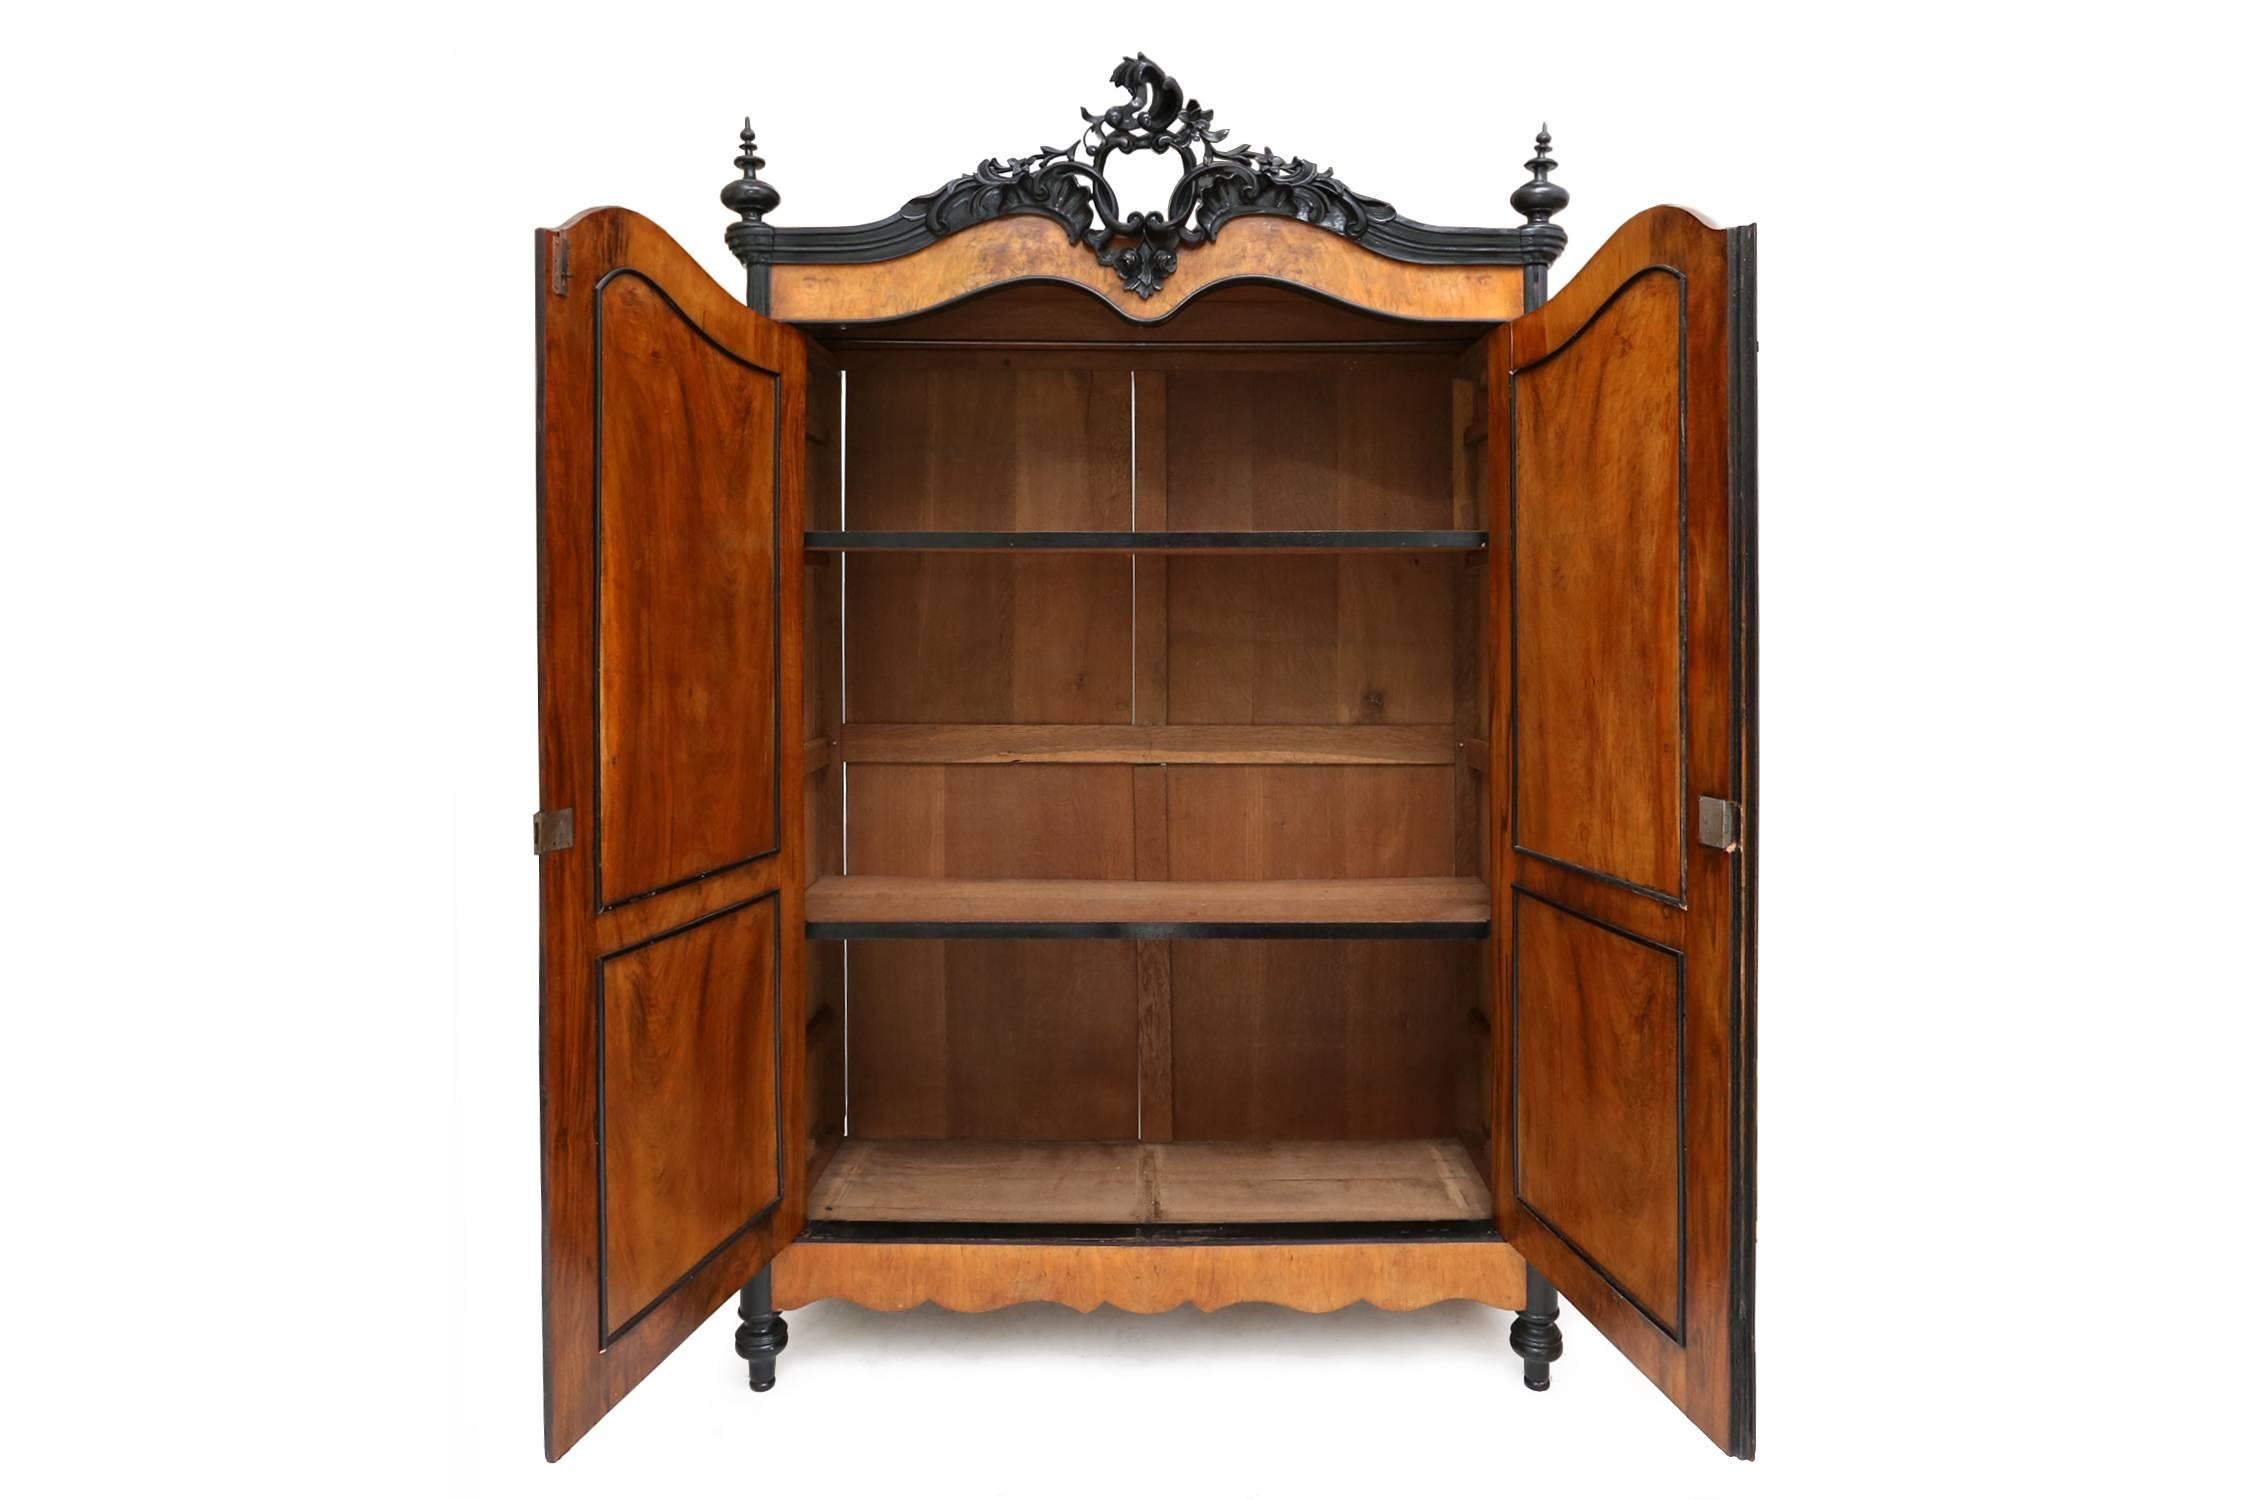 A very attractive model with ebonized mouldings and carved elements, the ornate rocaille,
twin c-scroll and trailing floral pierced cresting above a pair of arched cupboard doors enclosing two shelves,
The canted corners with corbels and the sides